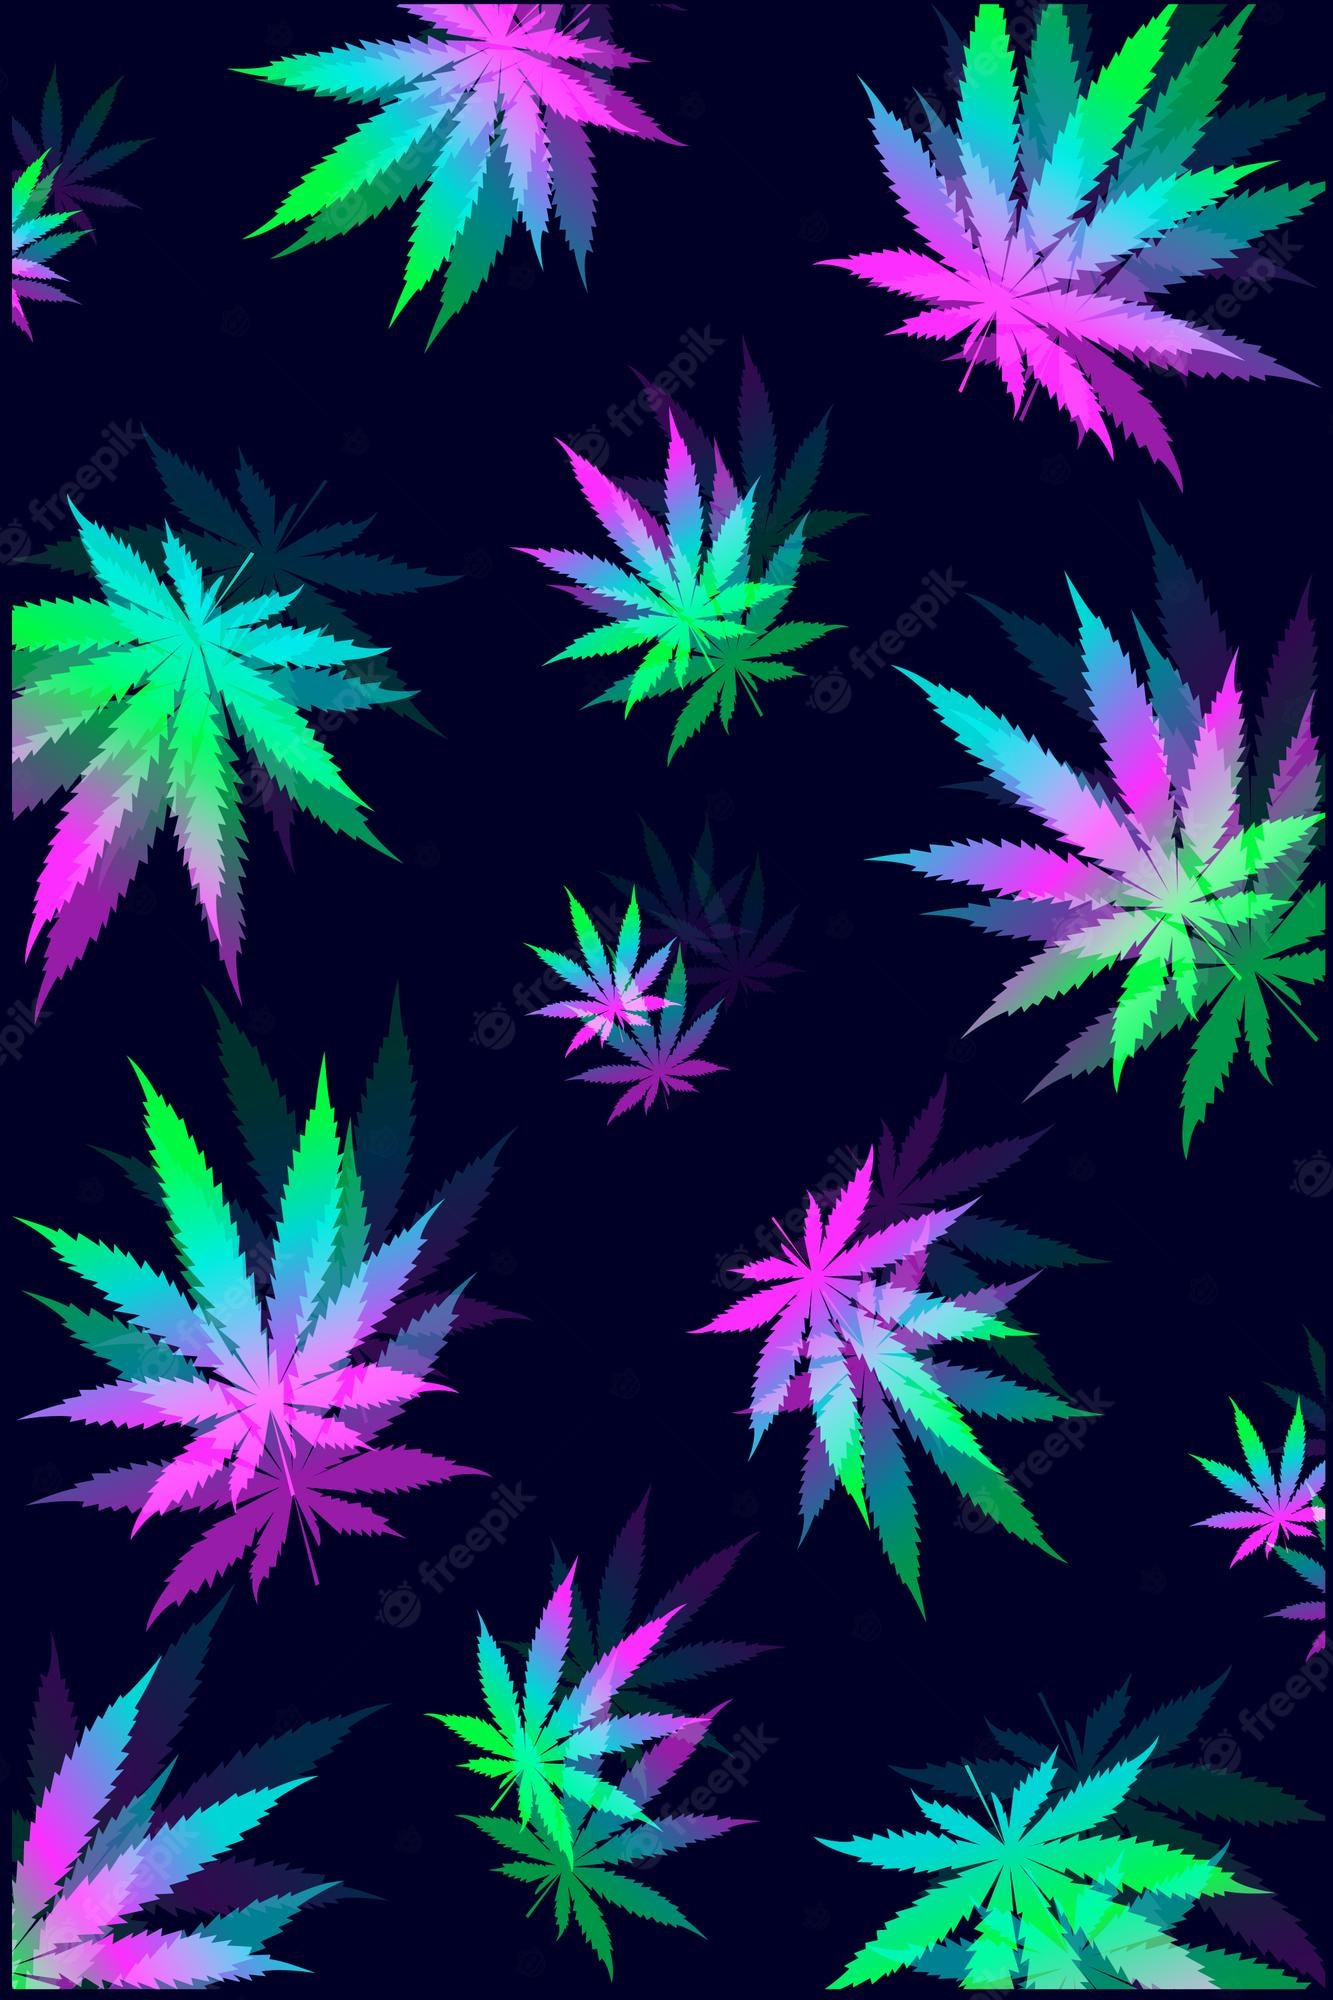 Premium Vector. Vector pattern weed leaves blur with neon colors on a dark background, hallucinogenic visual effect